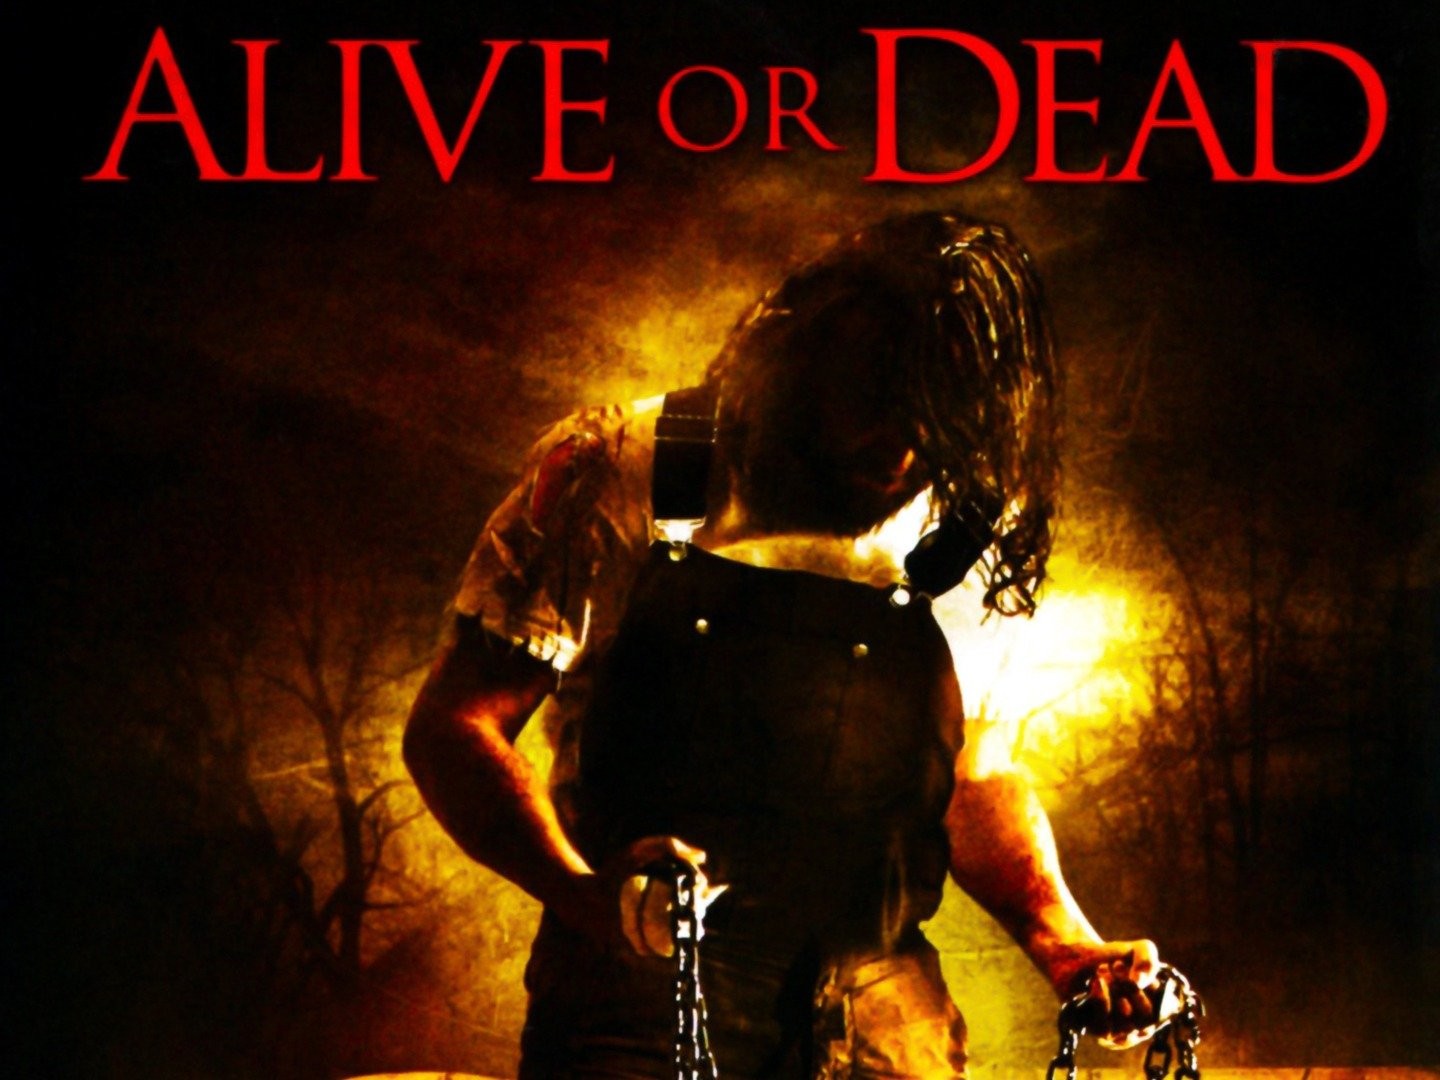 Alive or Dead Movie (2008) - video Dailymotion